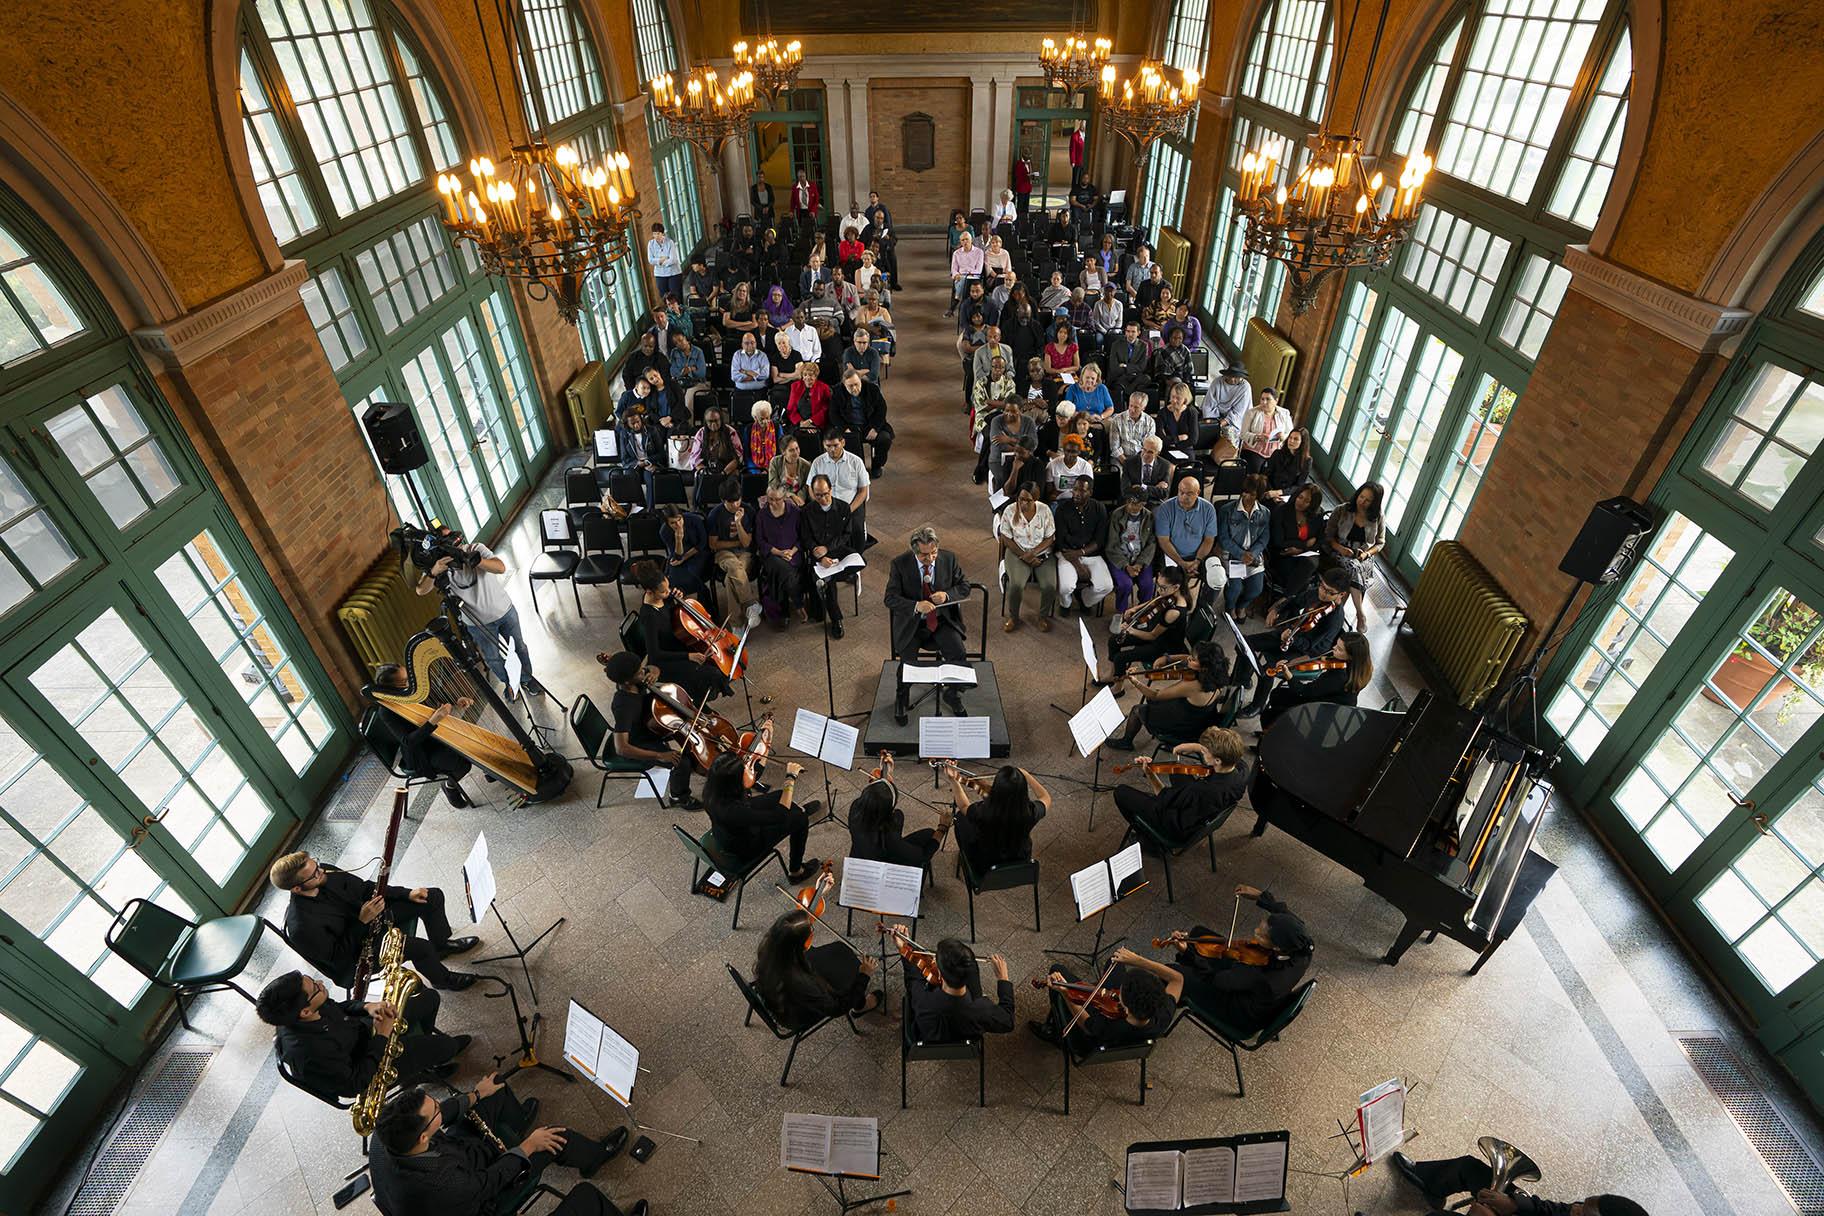 A community music rehearsal with the Chicago West Community Music Center and Riccardo Muti at the Columbus Park Refectory. (Photo by Todd Rosenberg)